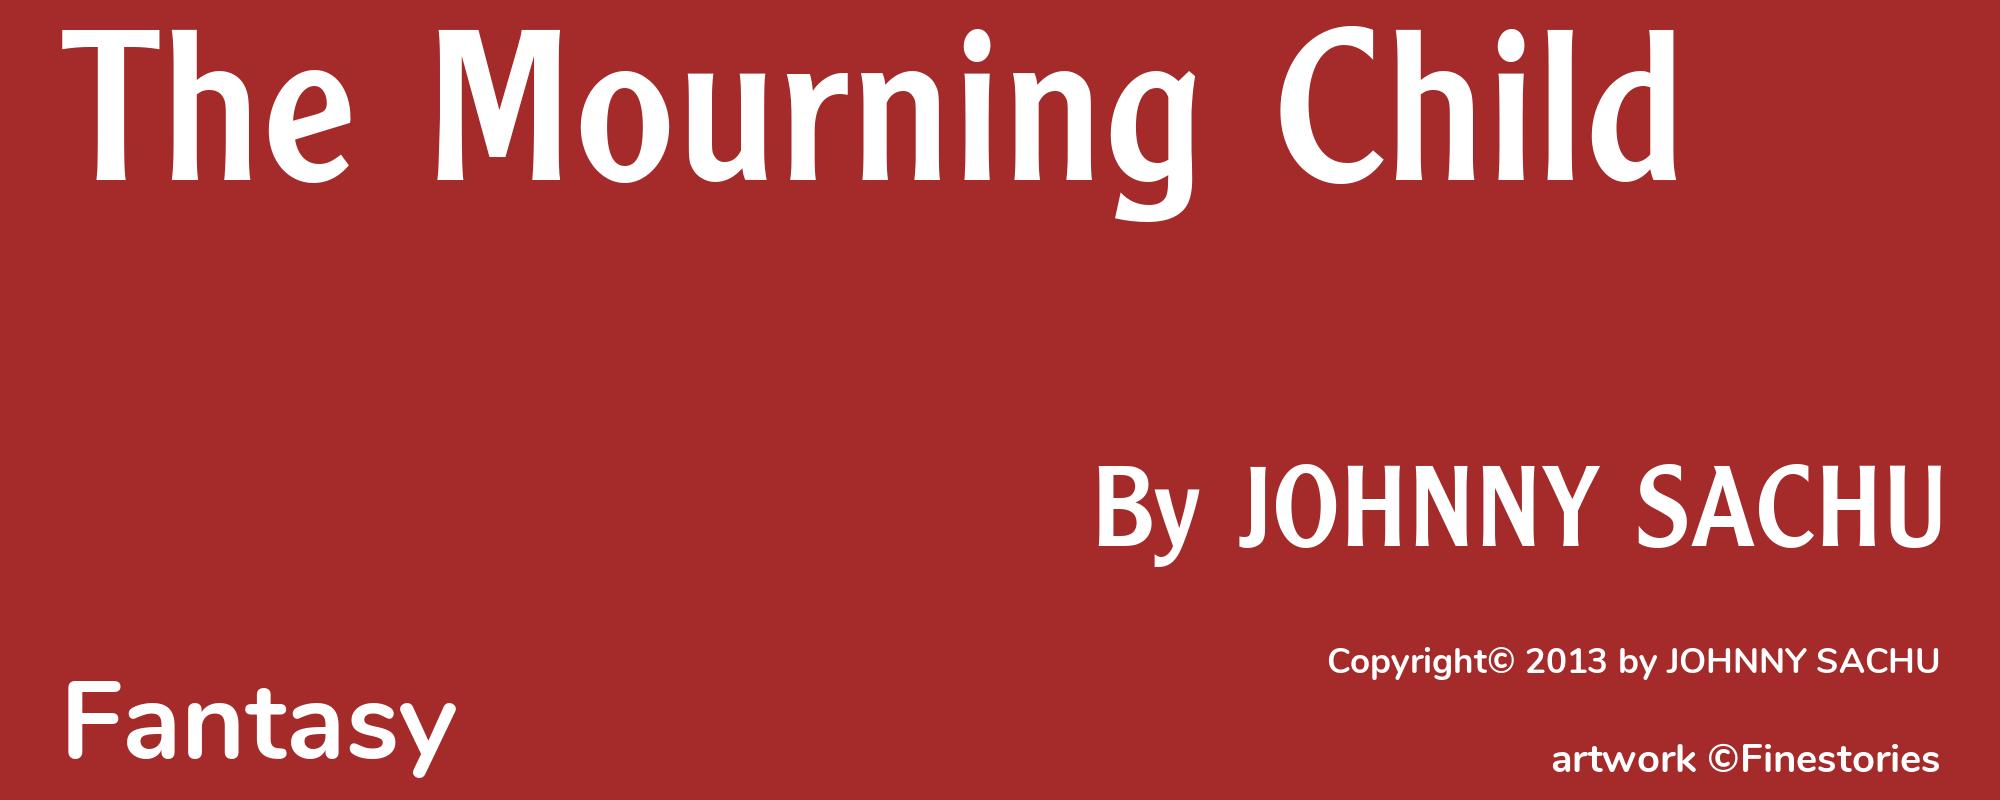 The Mourning Child - Cover